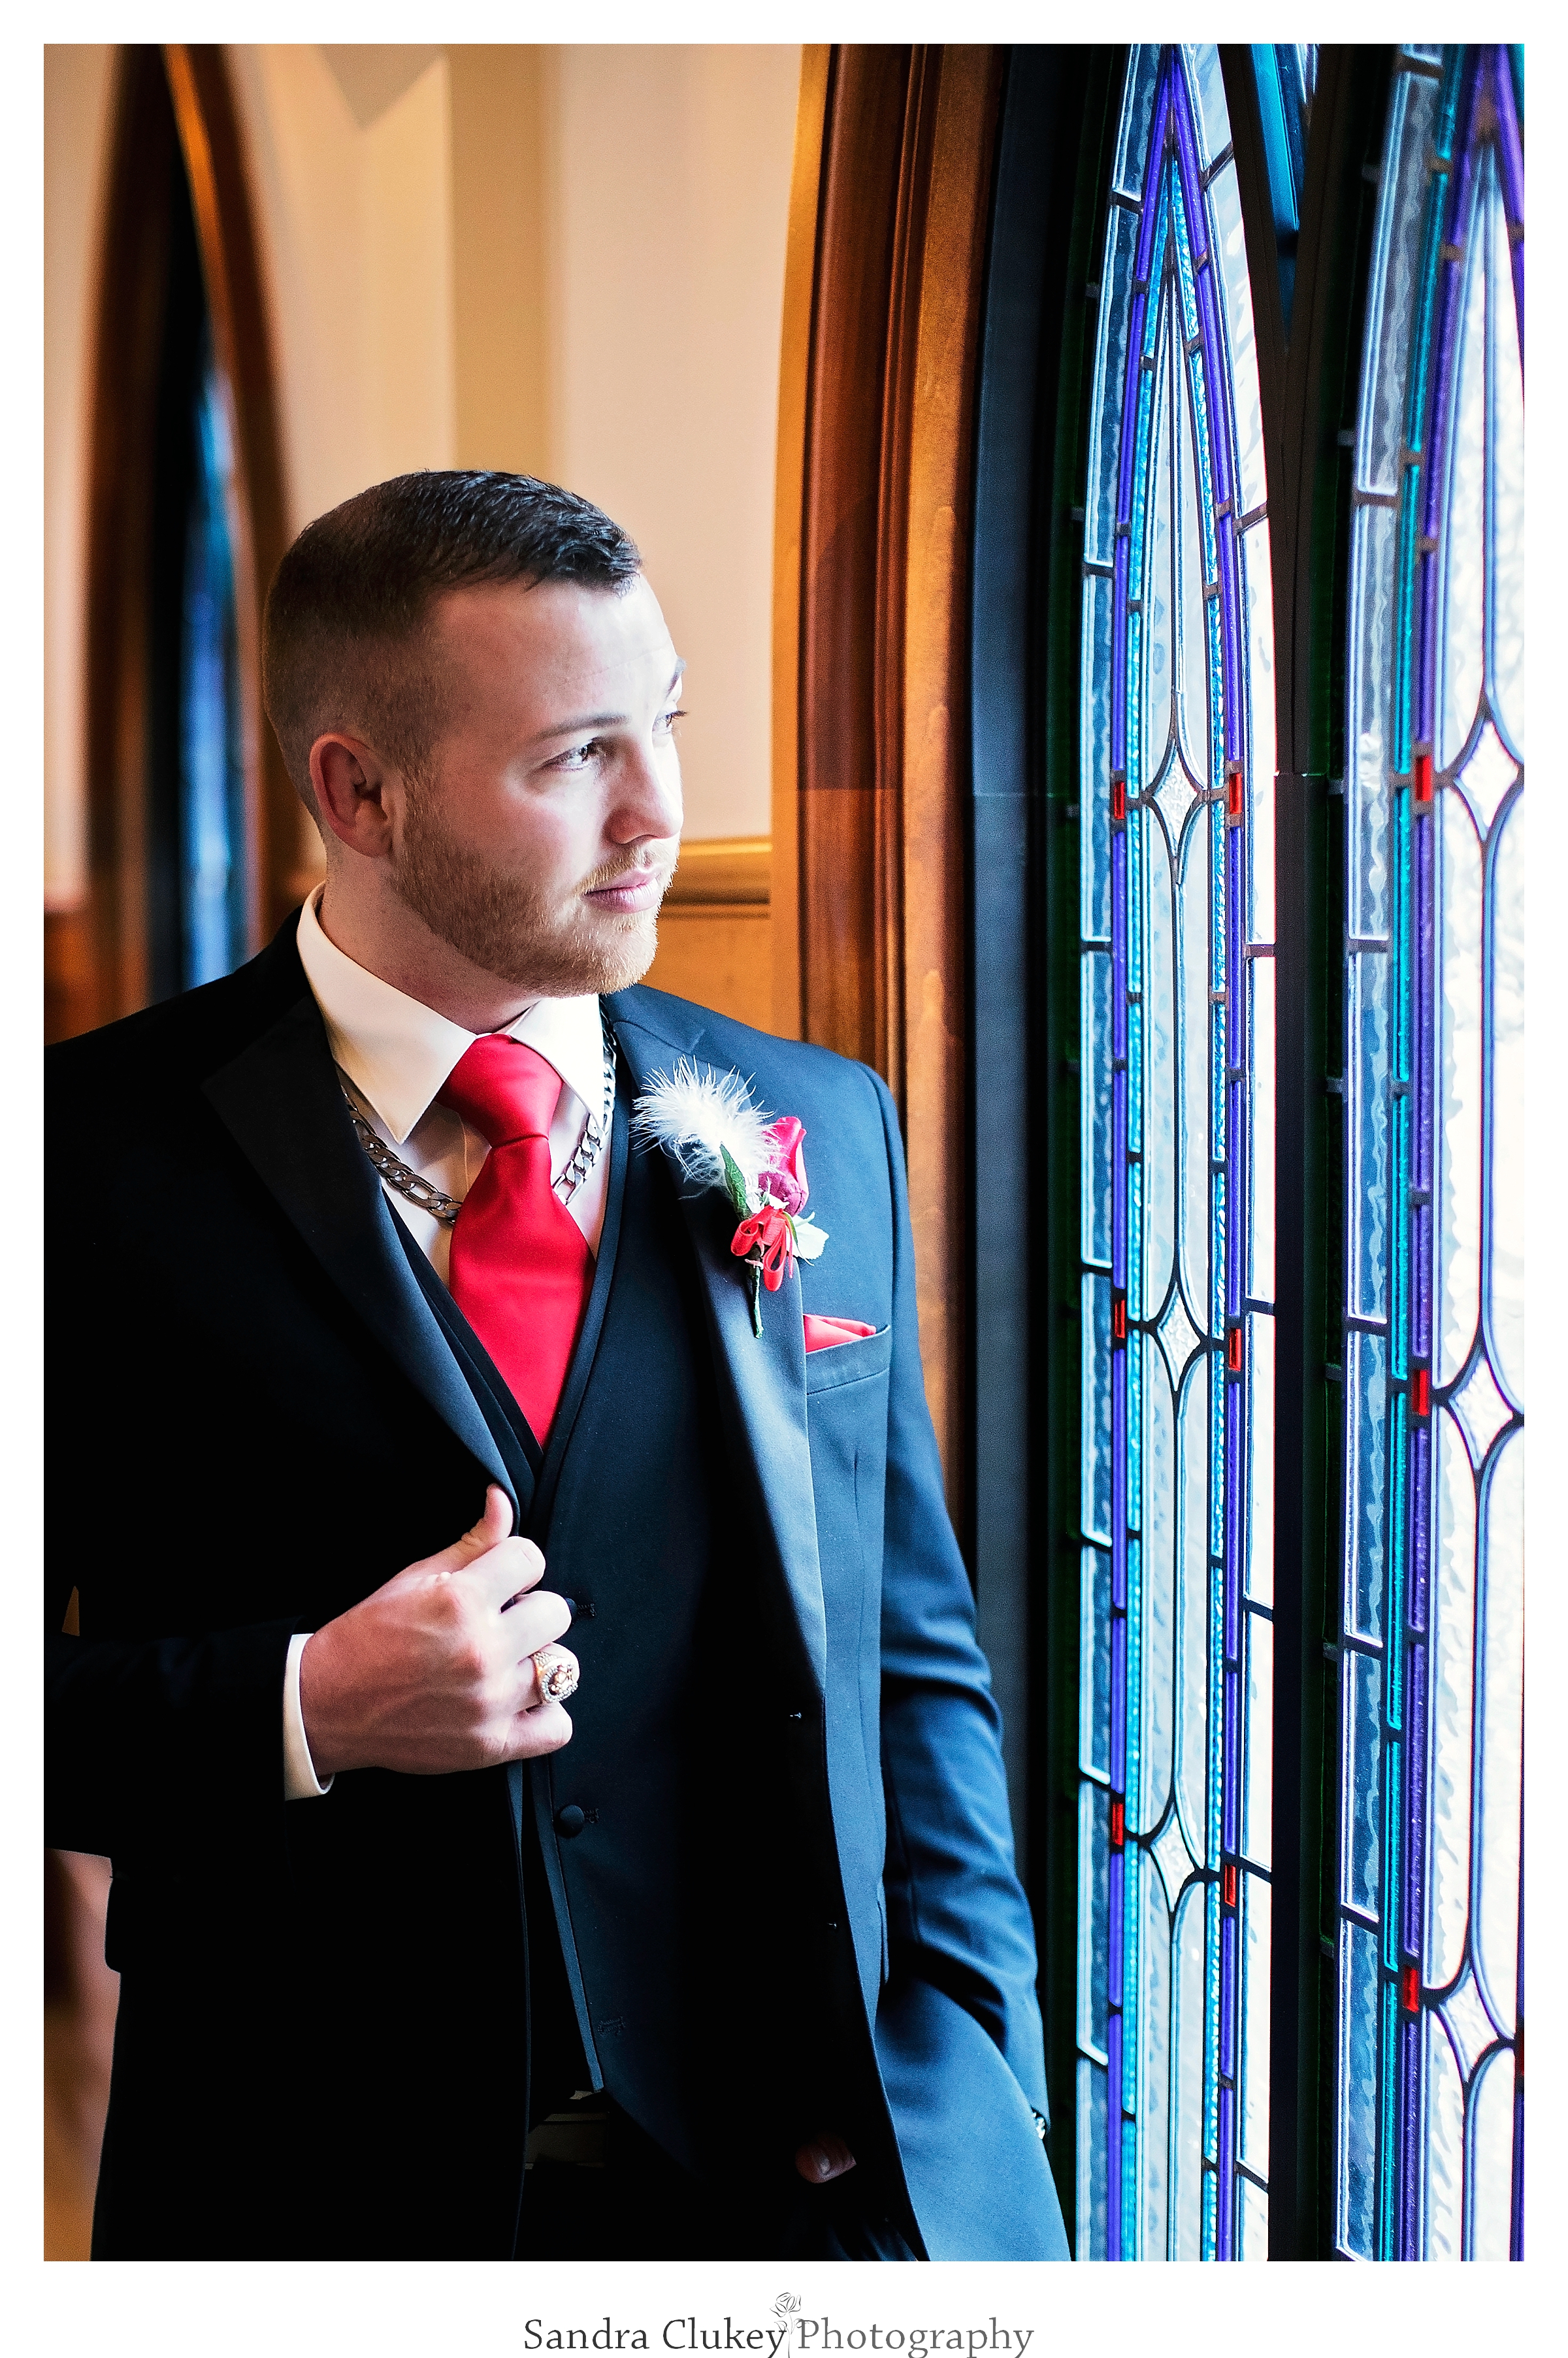 Groom at Lee University Chapel's stained glass window's